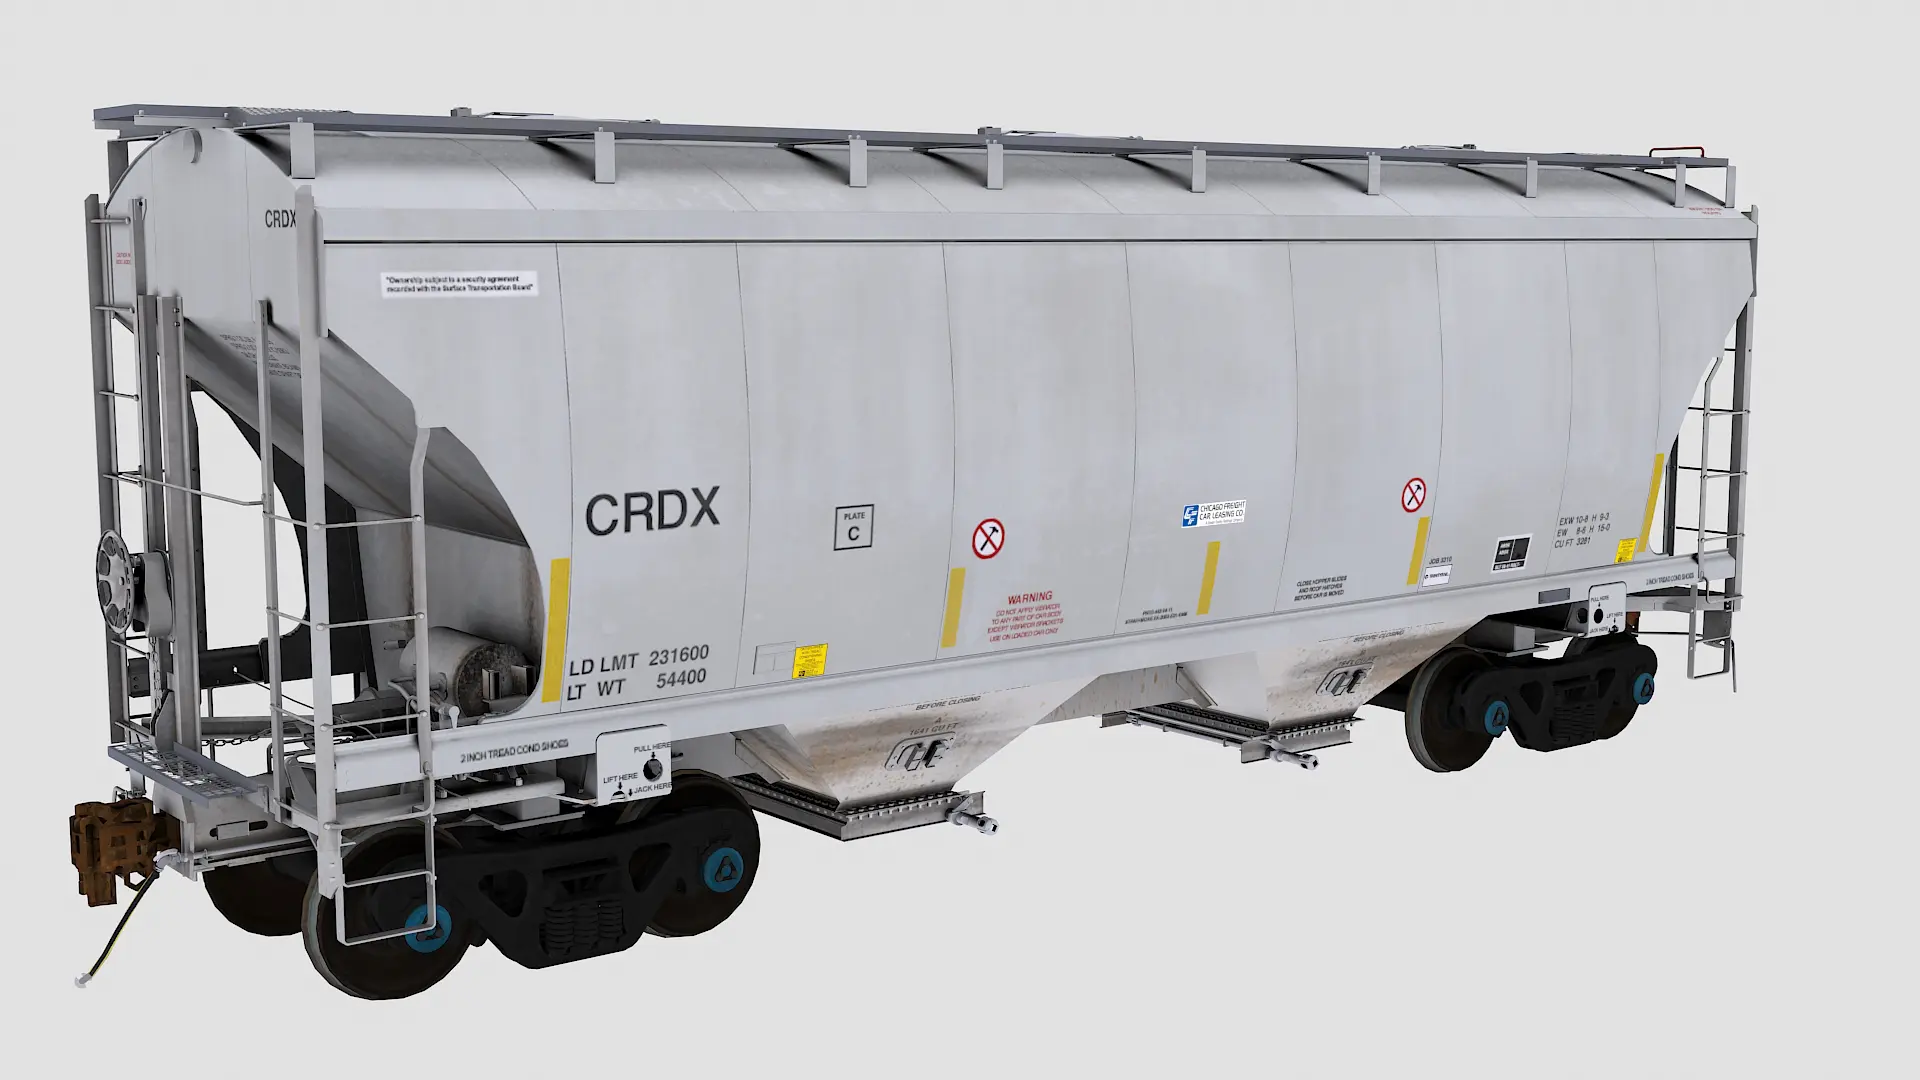 Two bay covered hopper is crdx